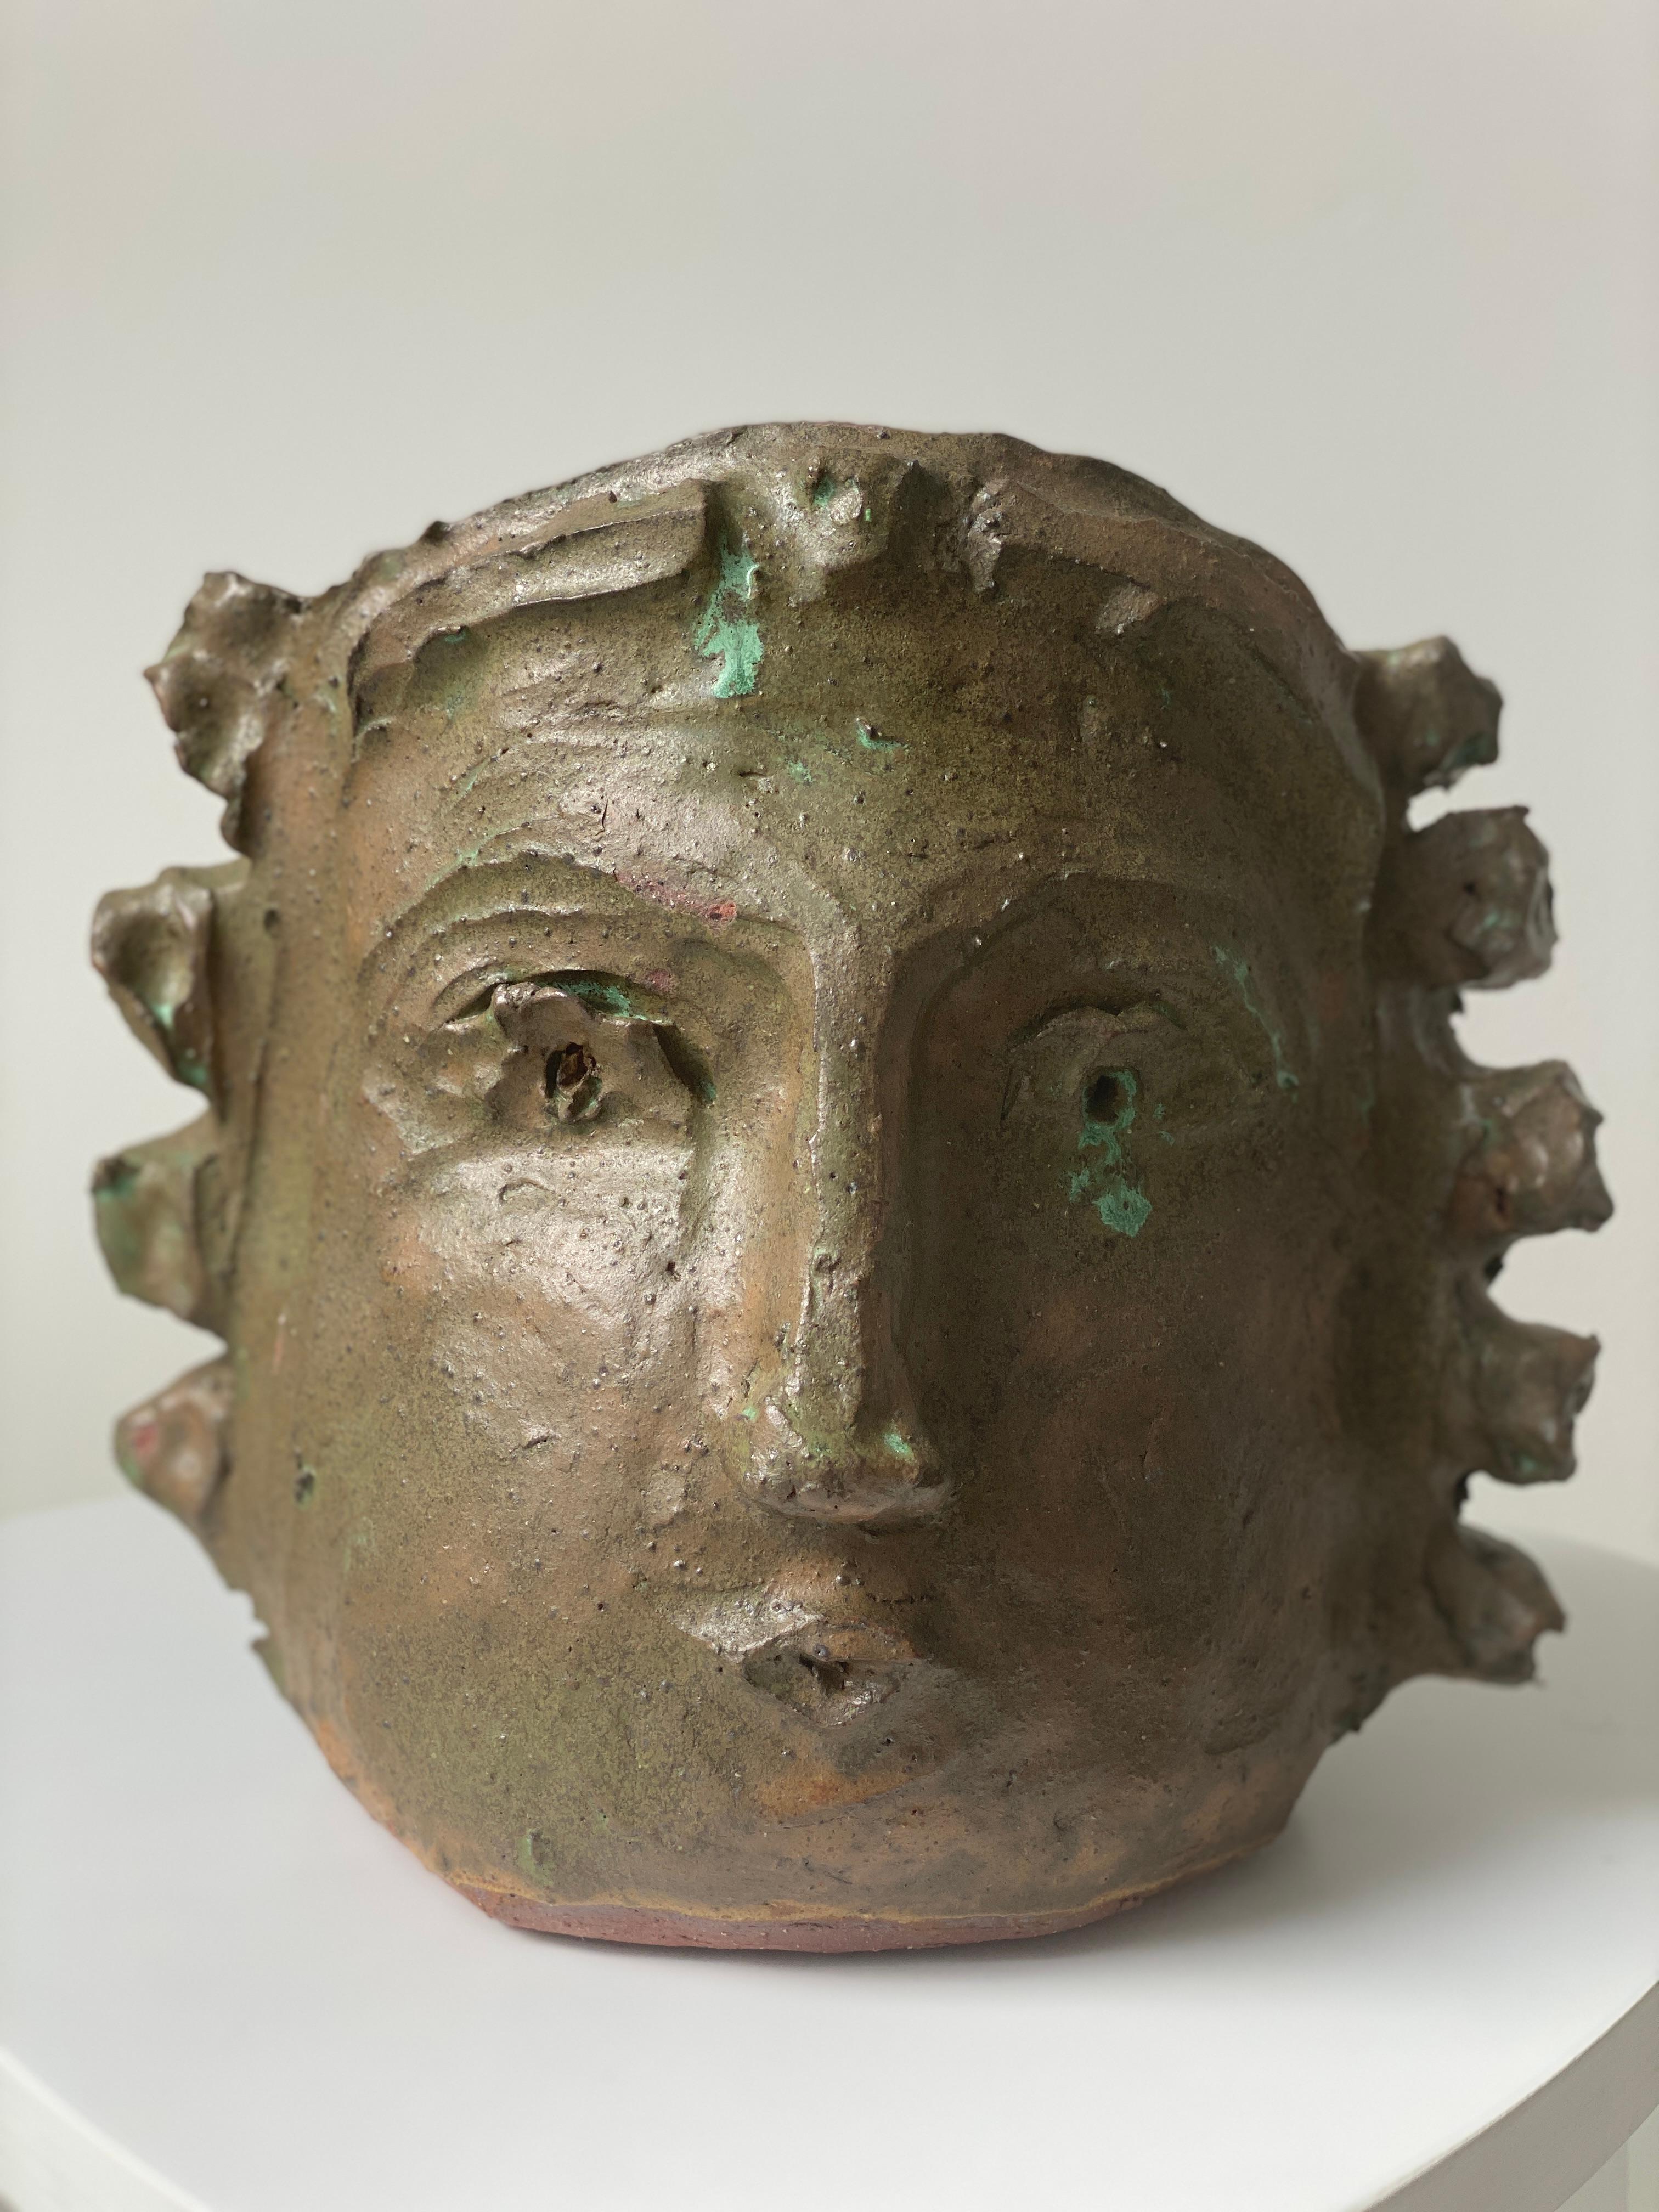 Introducing this extraordinary, handcrafted clay face and head vase, radiating deep green hues and earthy tones. 

Experience the essence of true craftsmanship with our captivating deep dark olive green and tan rustic clay head vase. Hand-built and